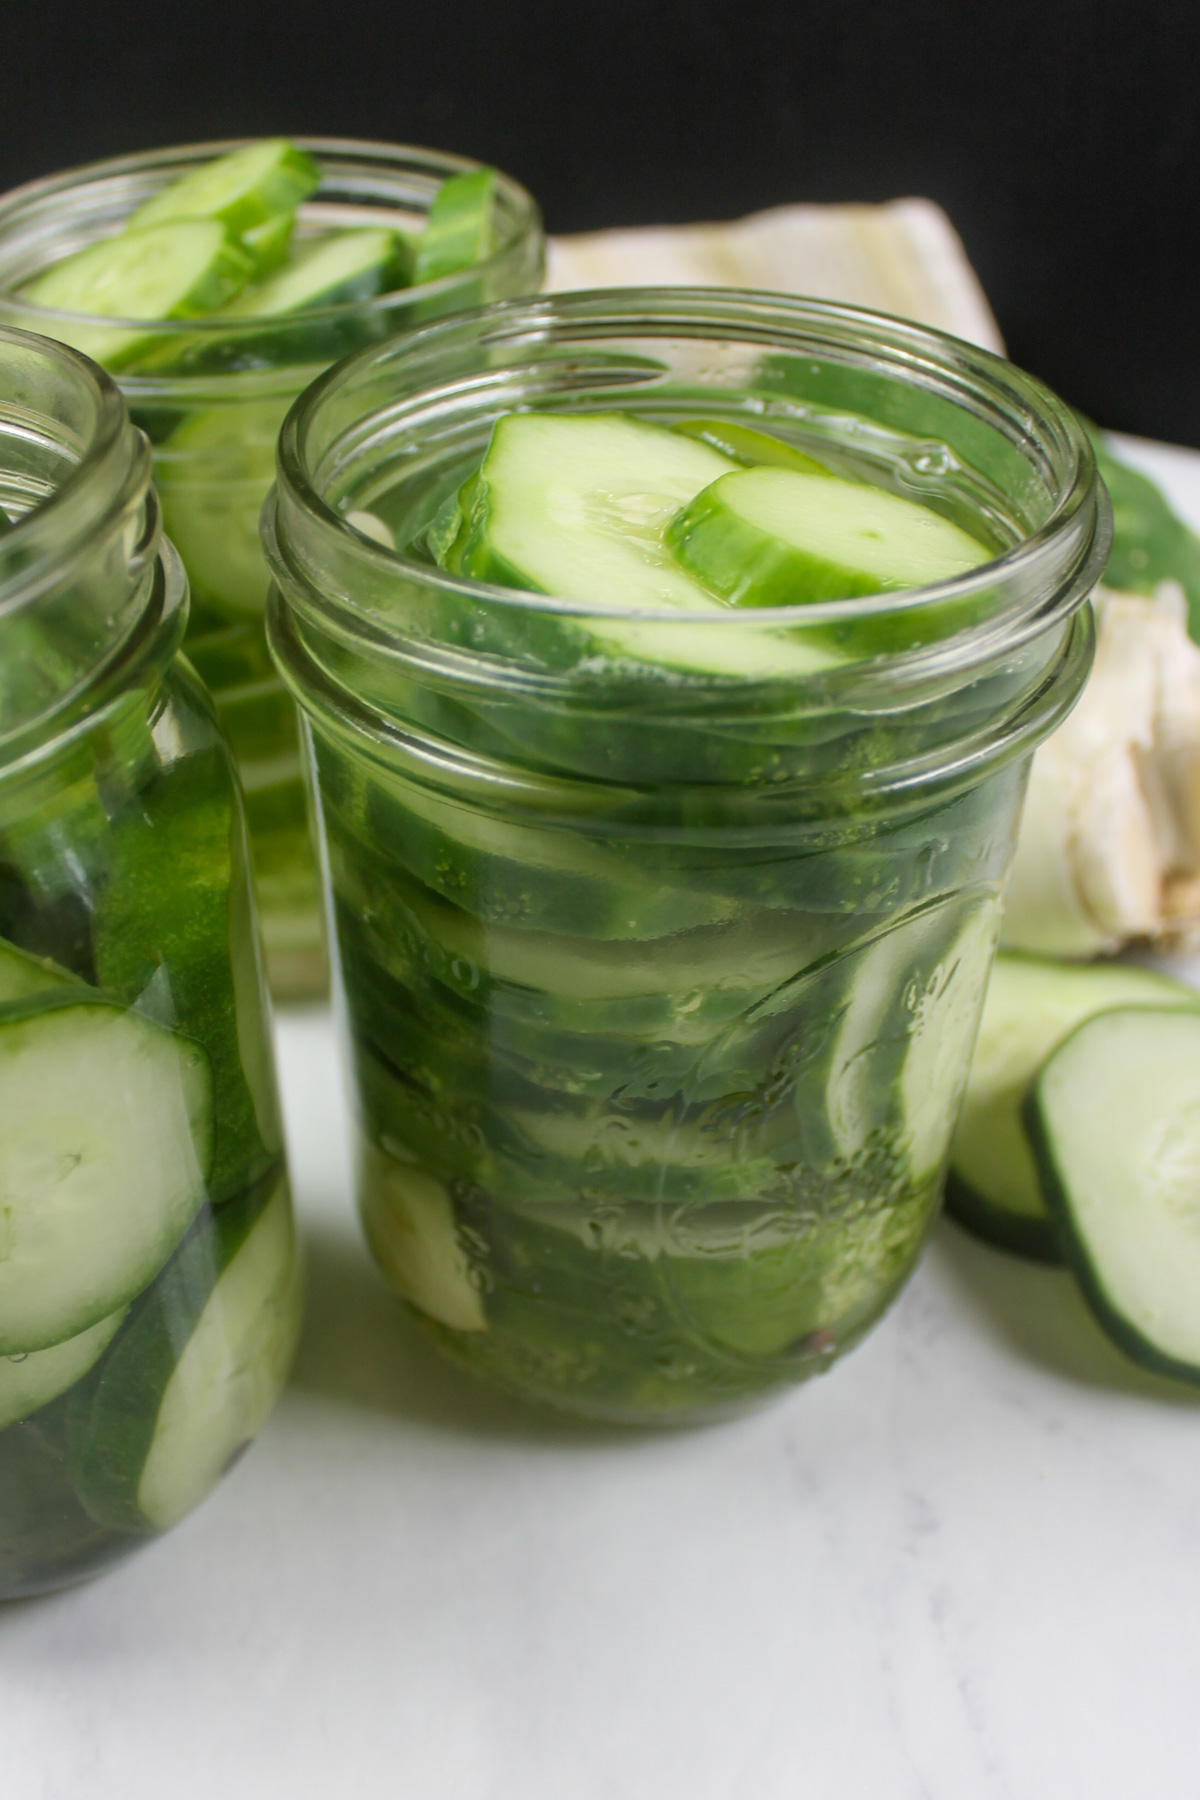 Refrigerator pickles made from garden cucumbers.